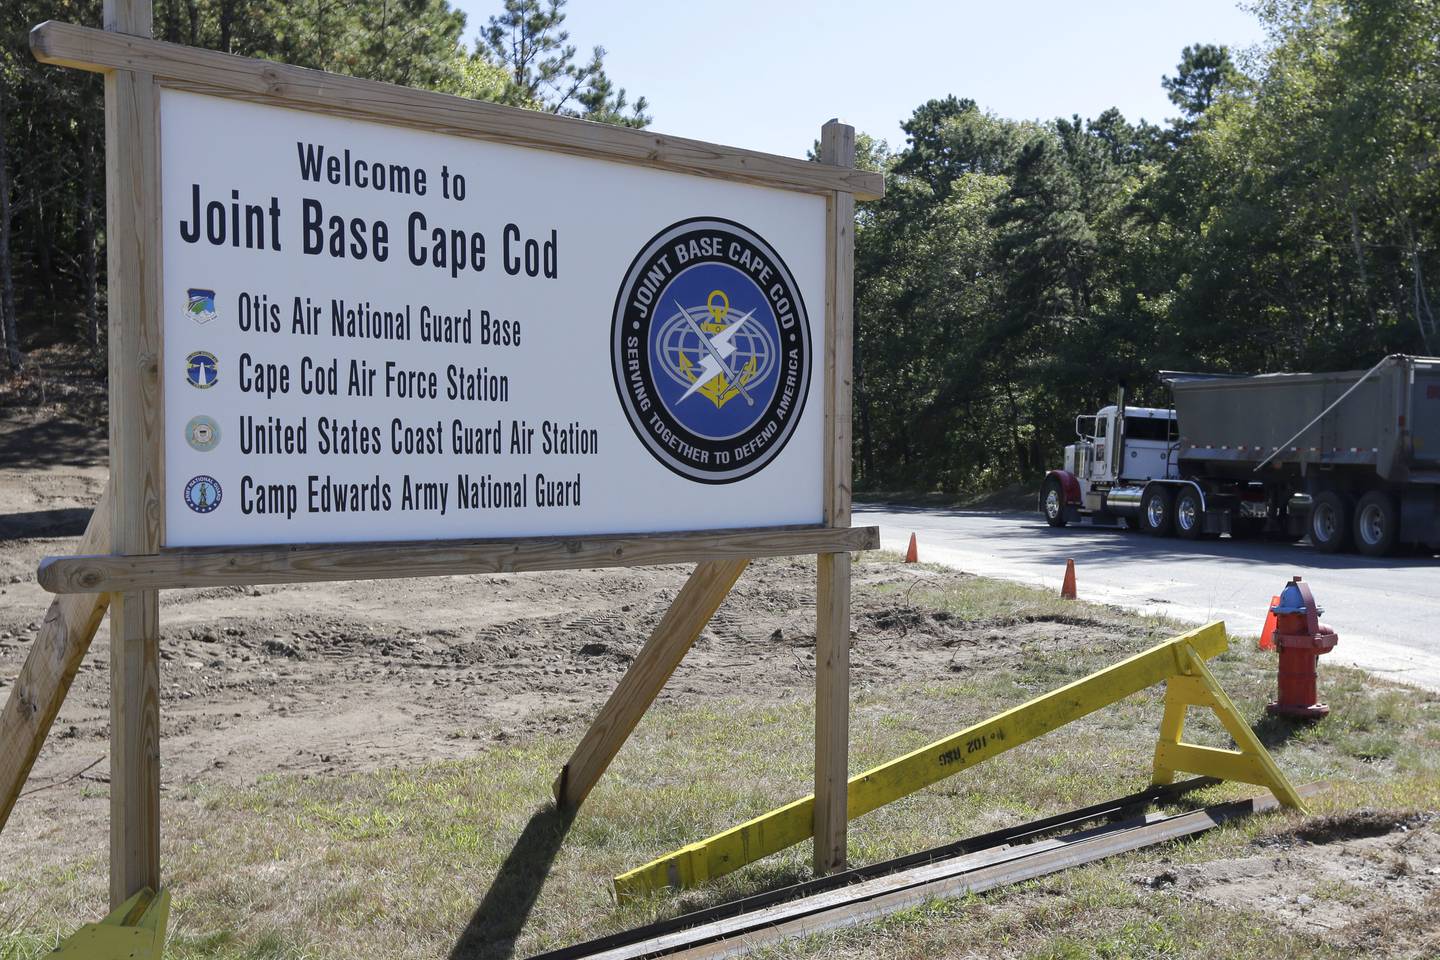 A truck drives past a welcome sign to Joint Base Cape Cod, Sept. 22, 2014, in Sandwich, Mass.